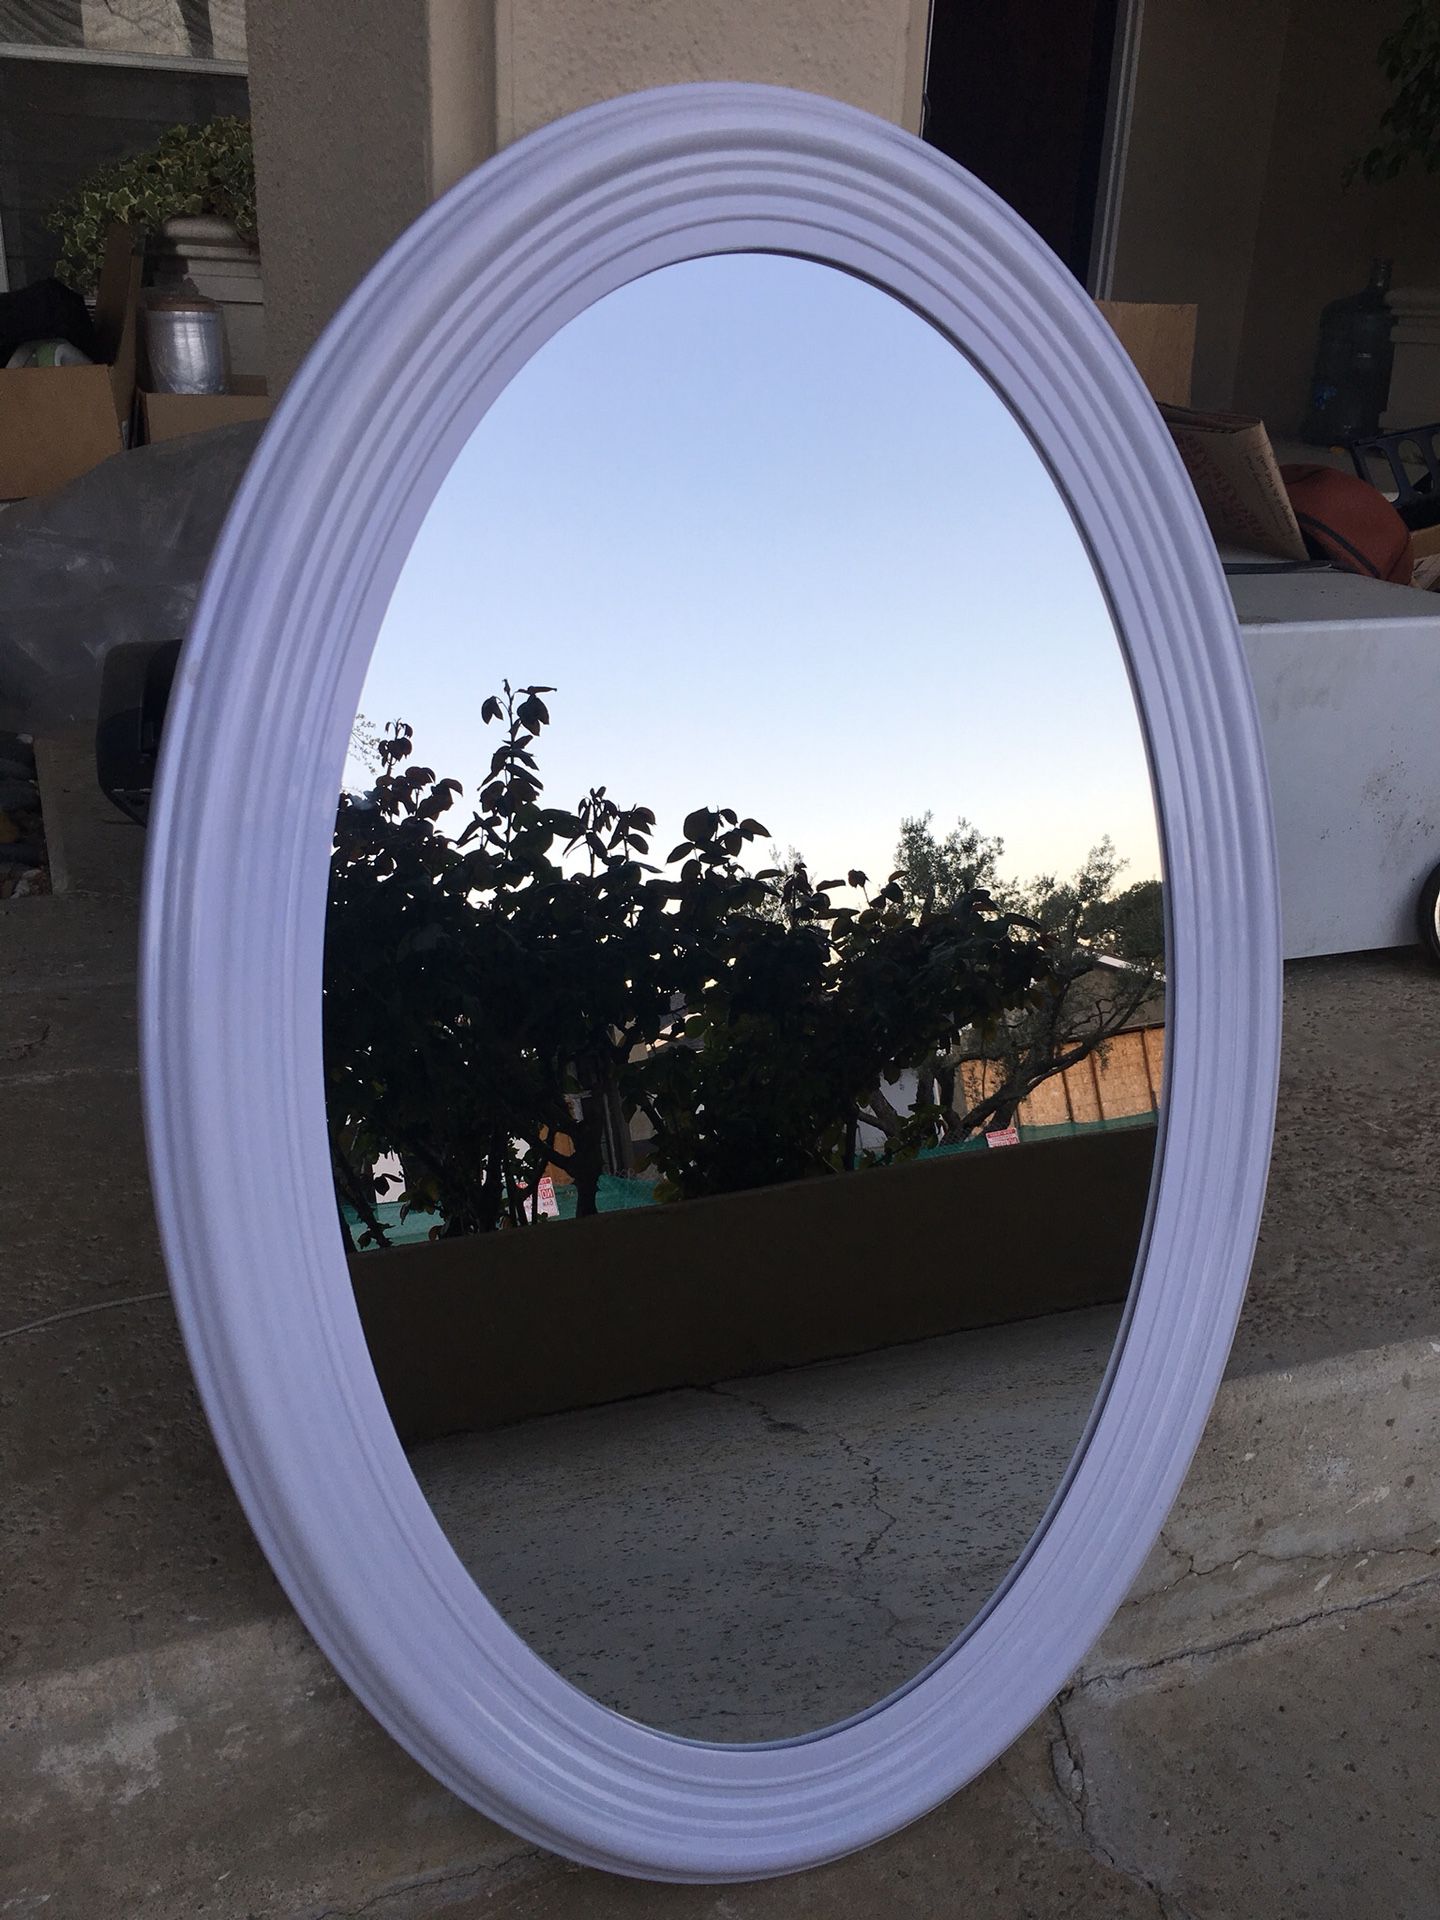 Oval mirror 22x30 inch in a white frame. New